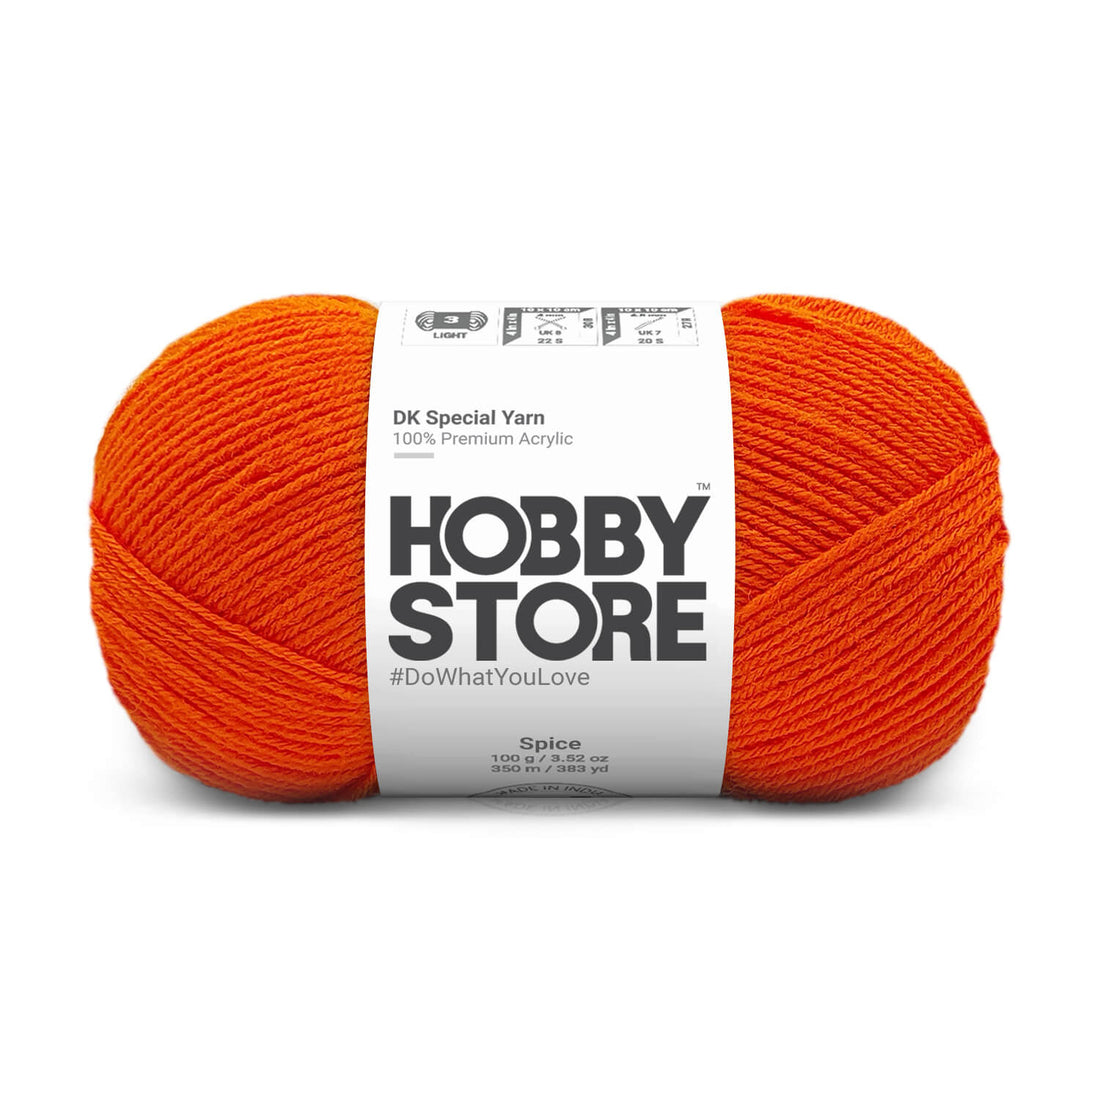 Hobby Store DK Special Yarn - Spice 1711